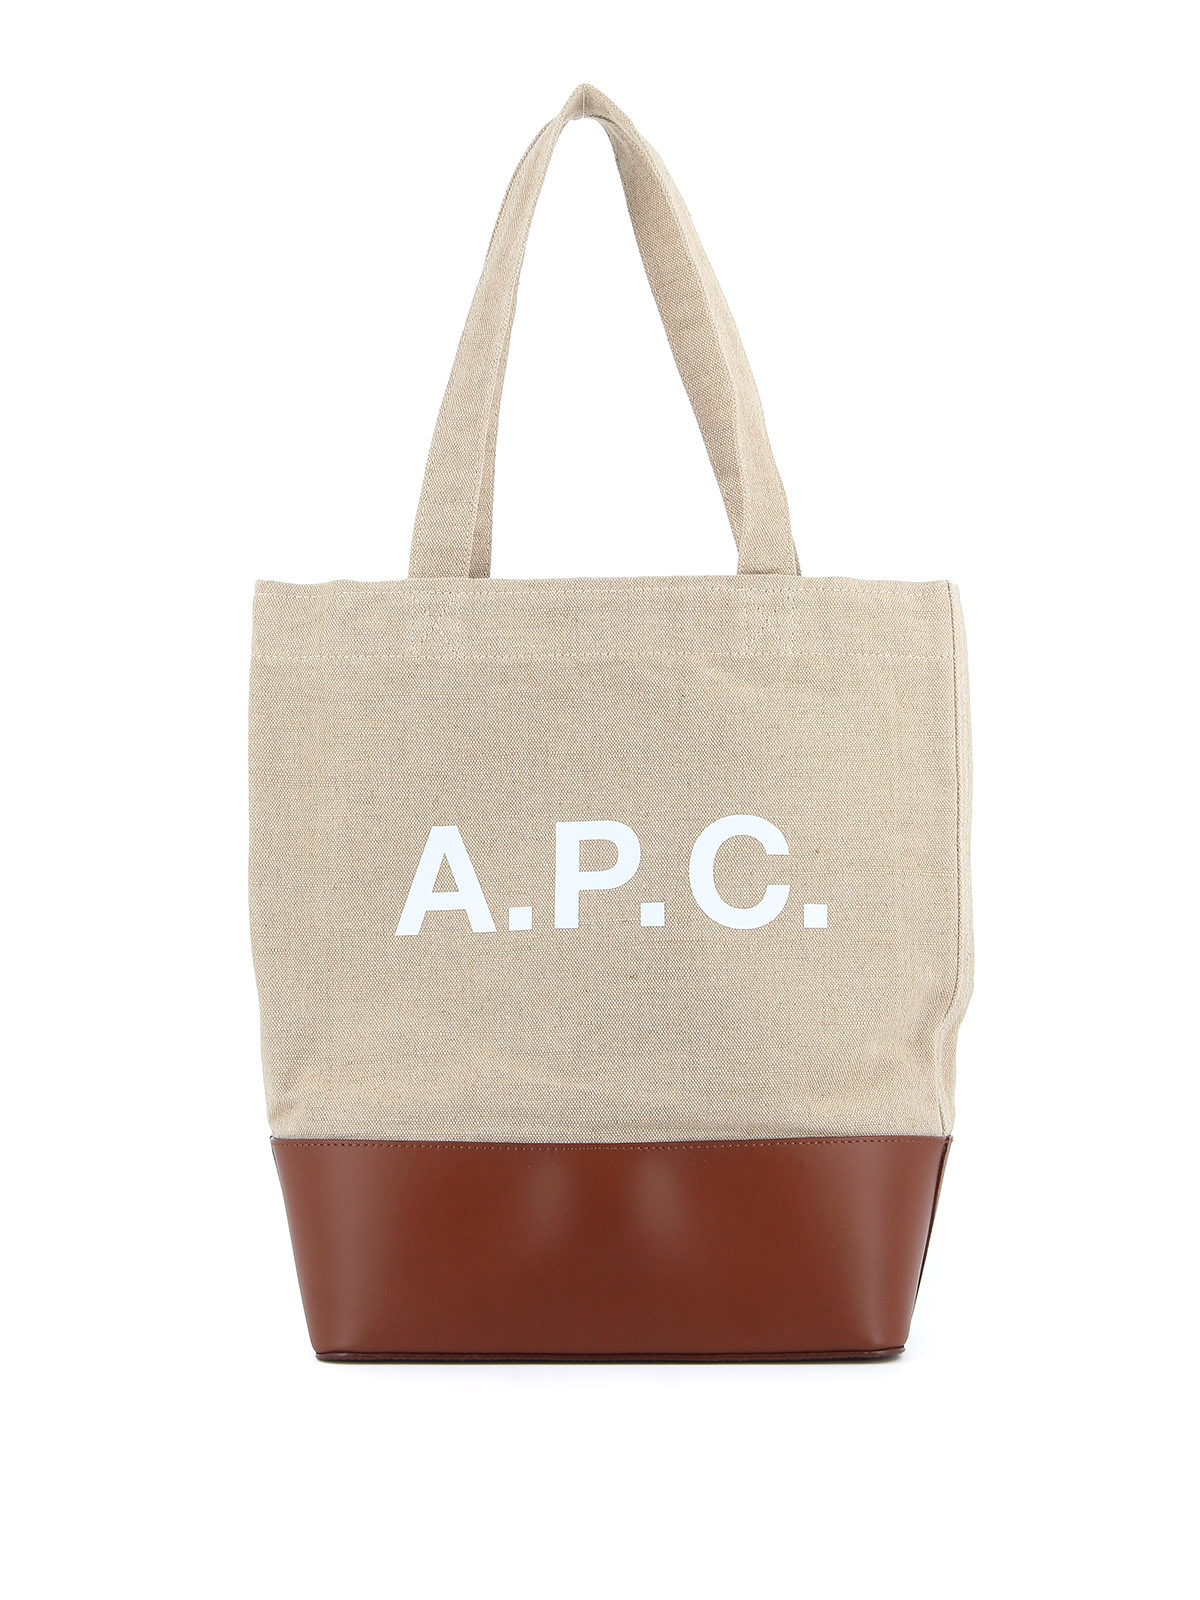 A.P.C. - Axelle tote - totes bags - LIADUM61444CAD | Shop online at iKRIX